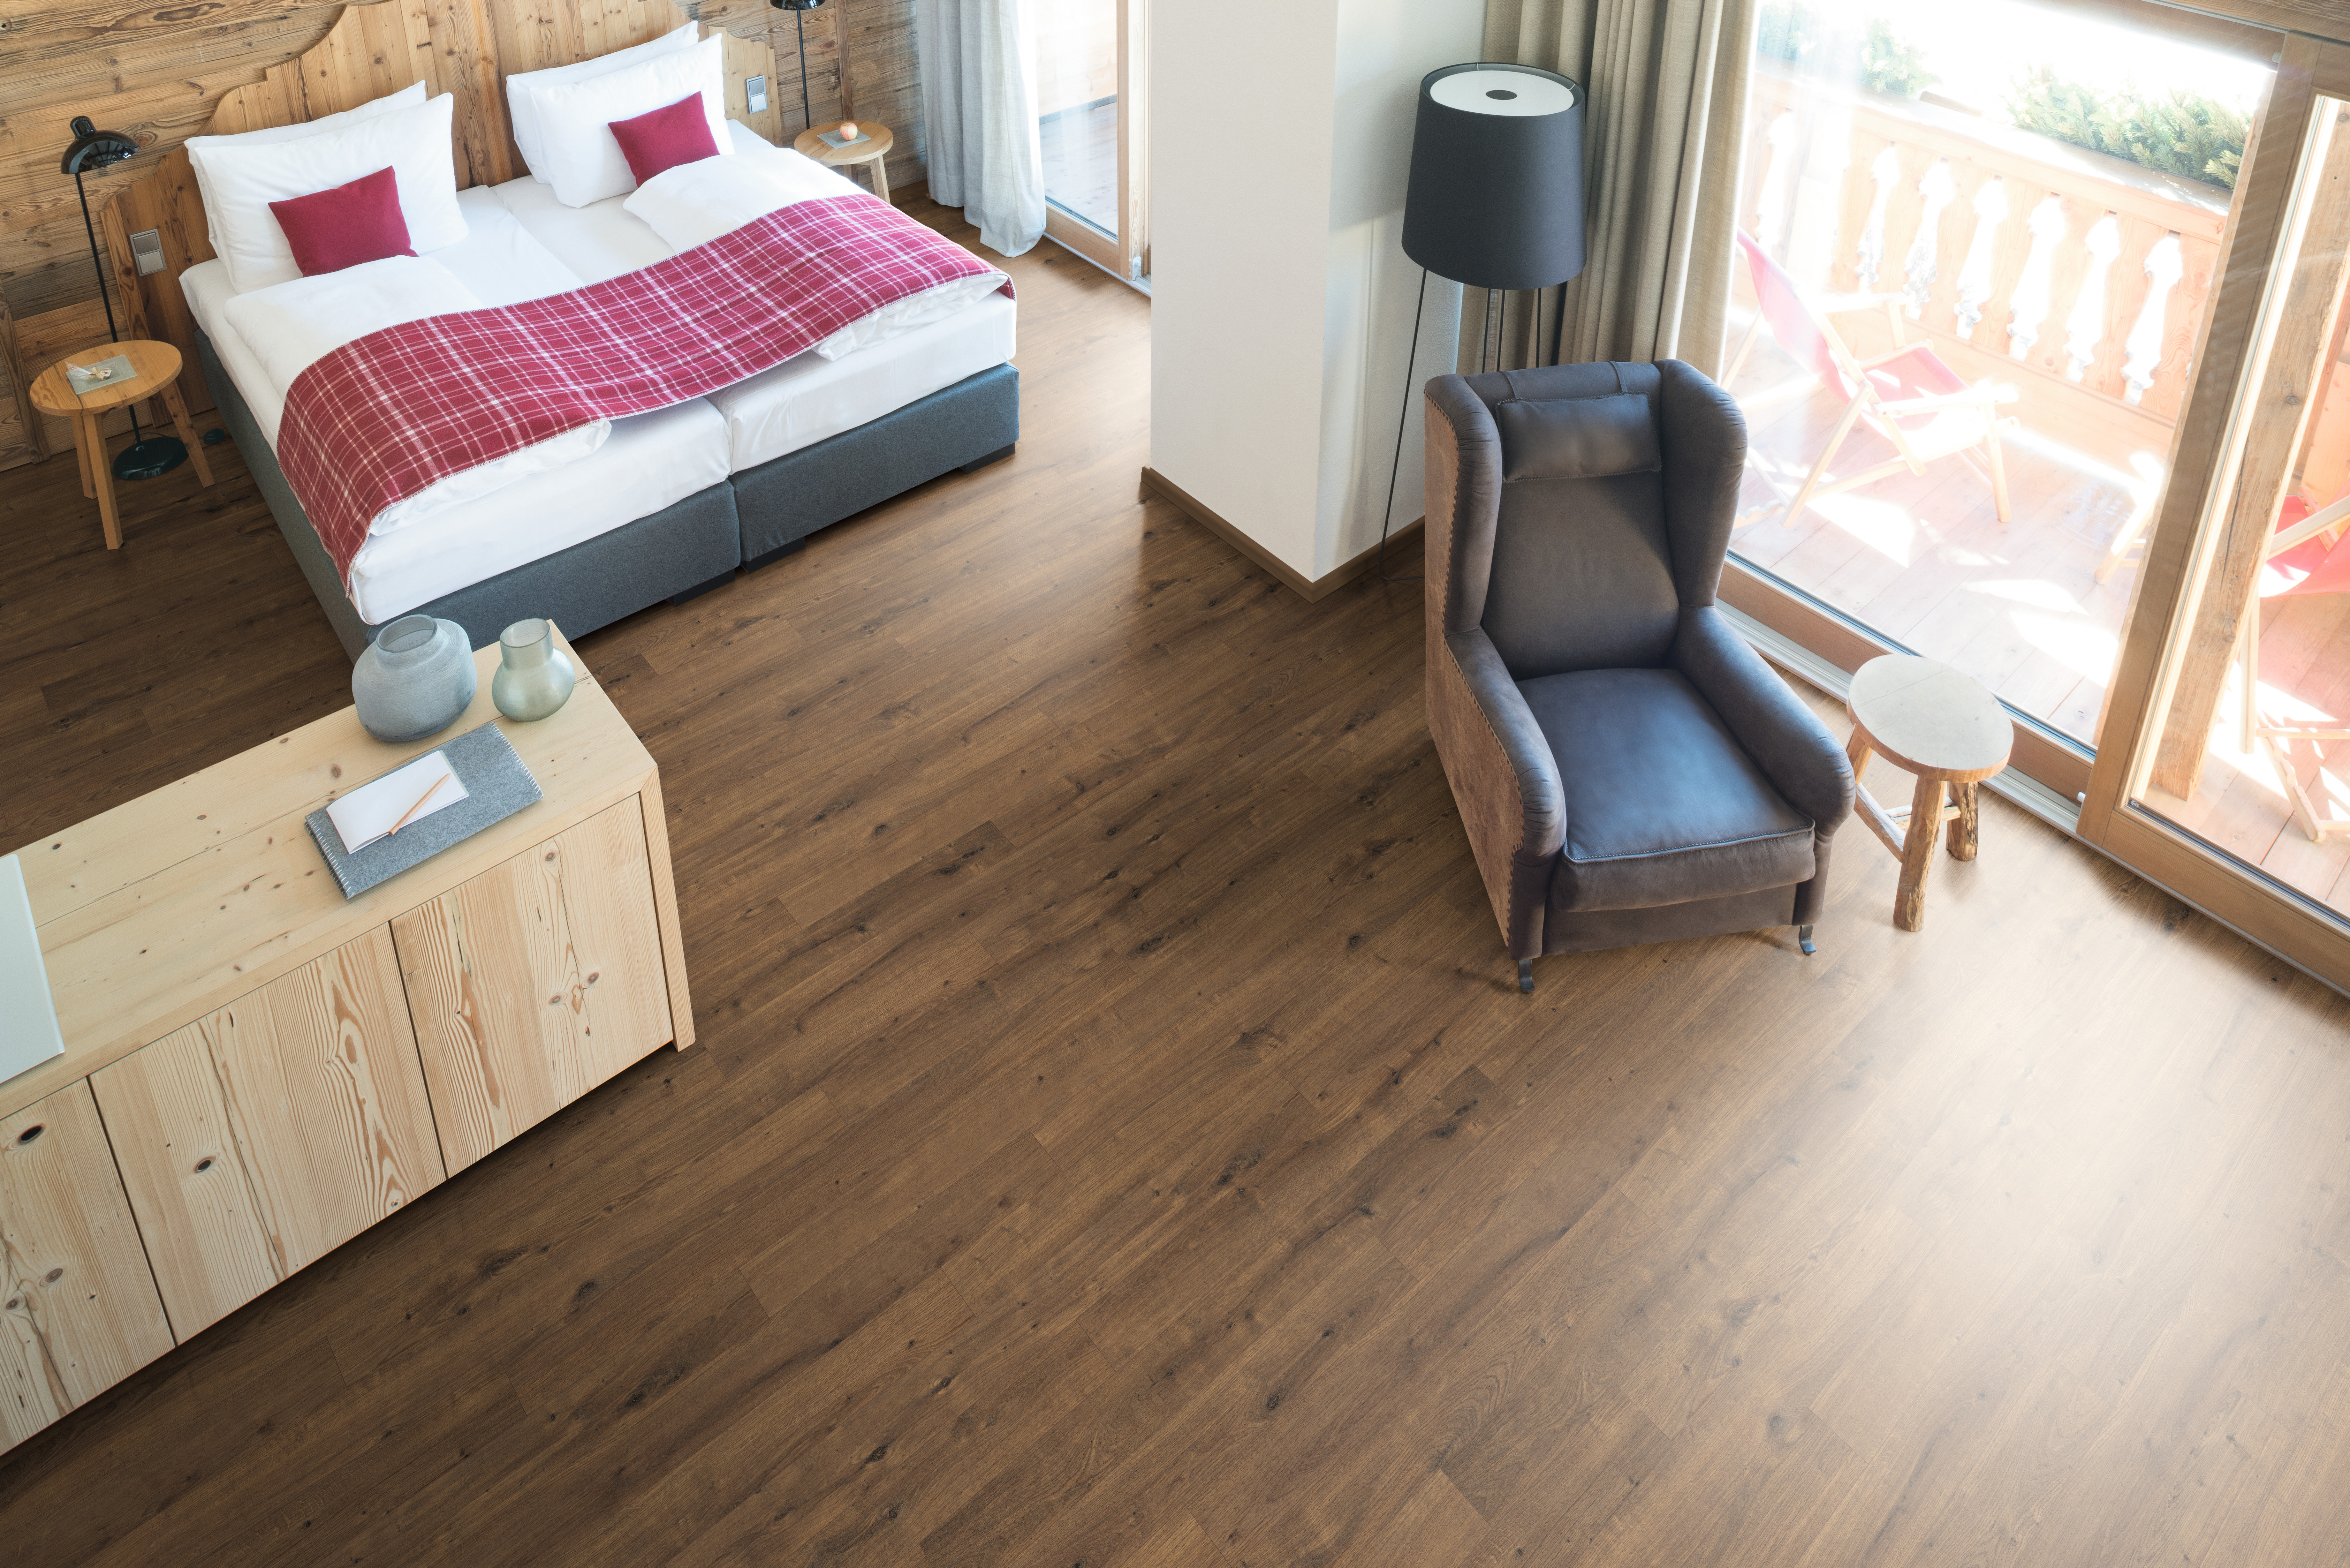 Classic floorboards are suitable for any space.